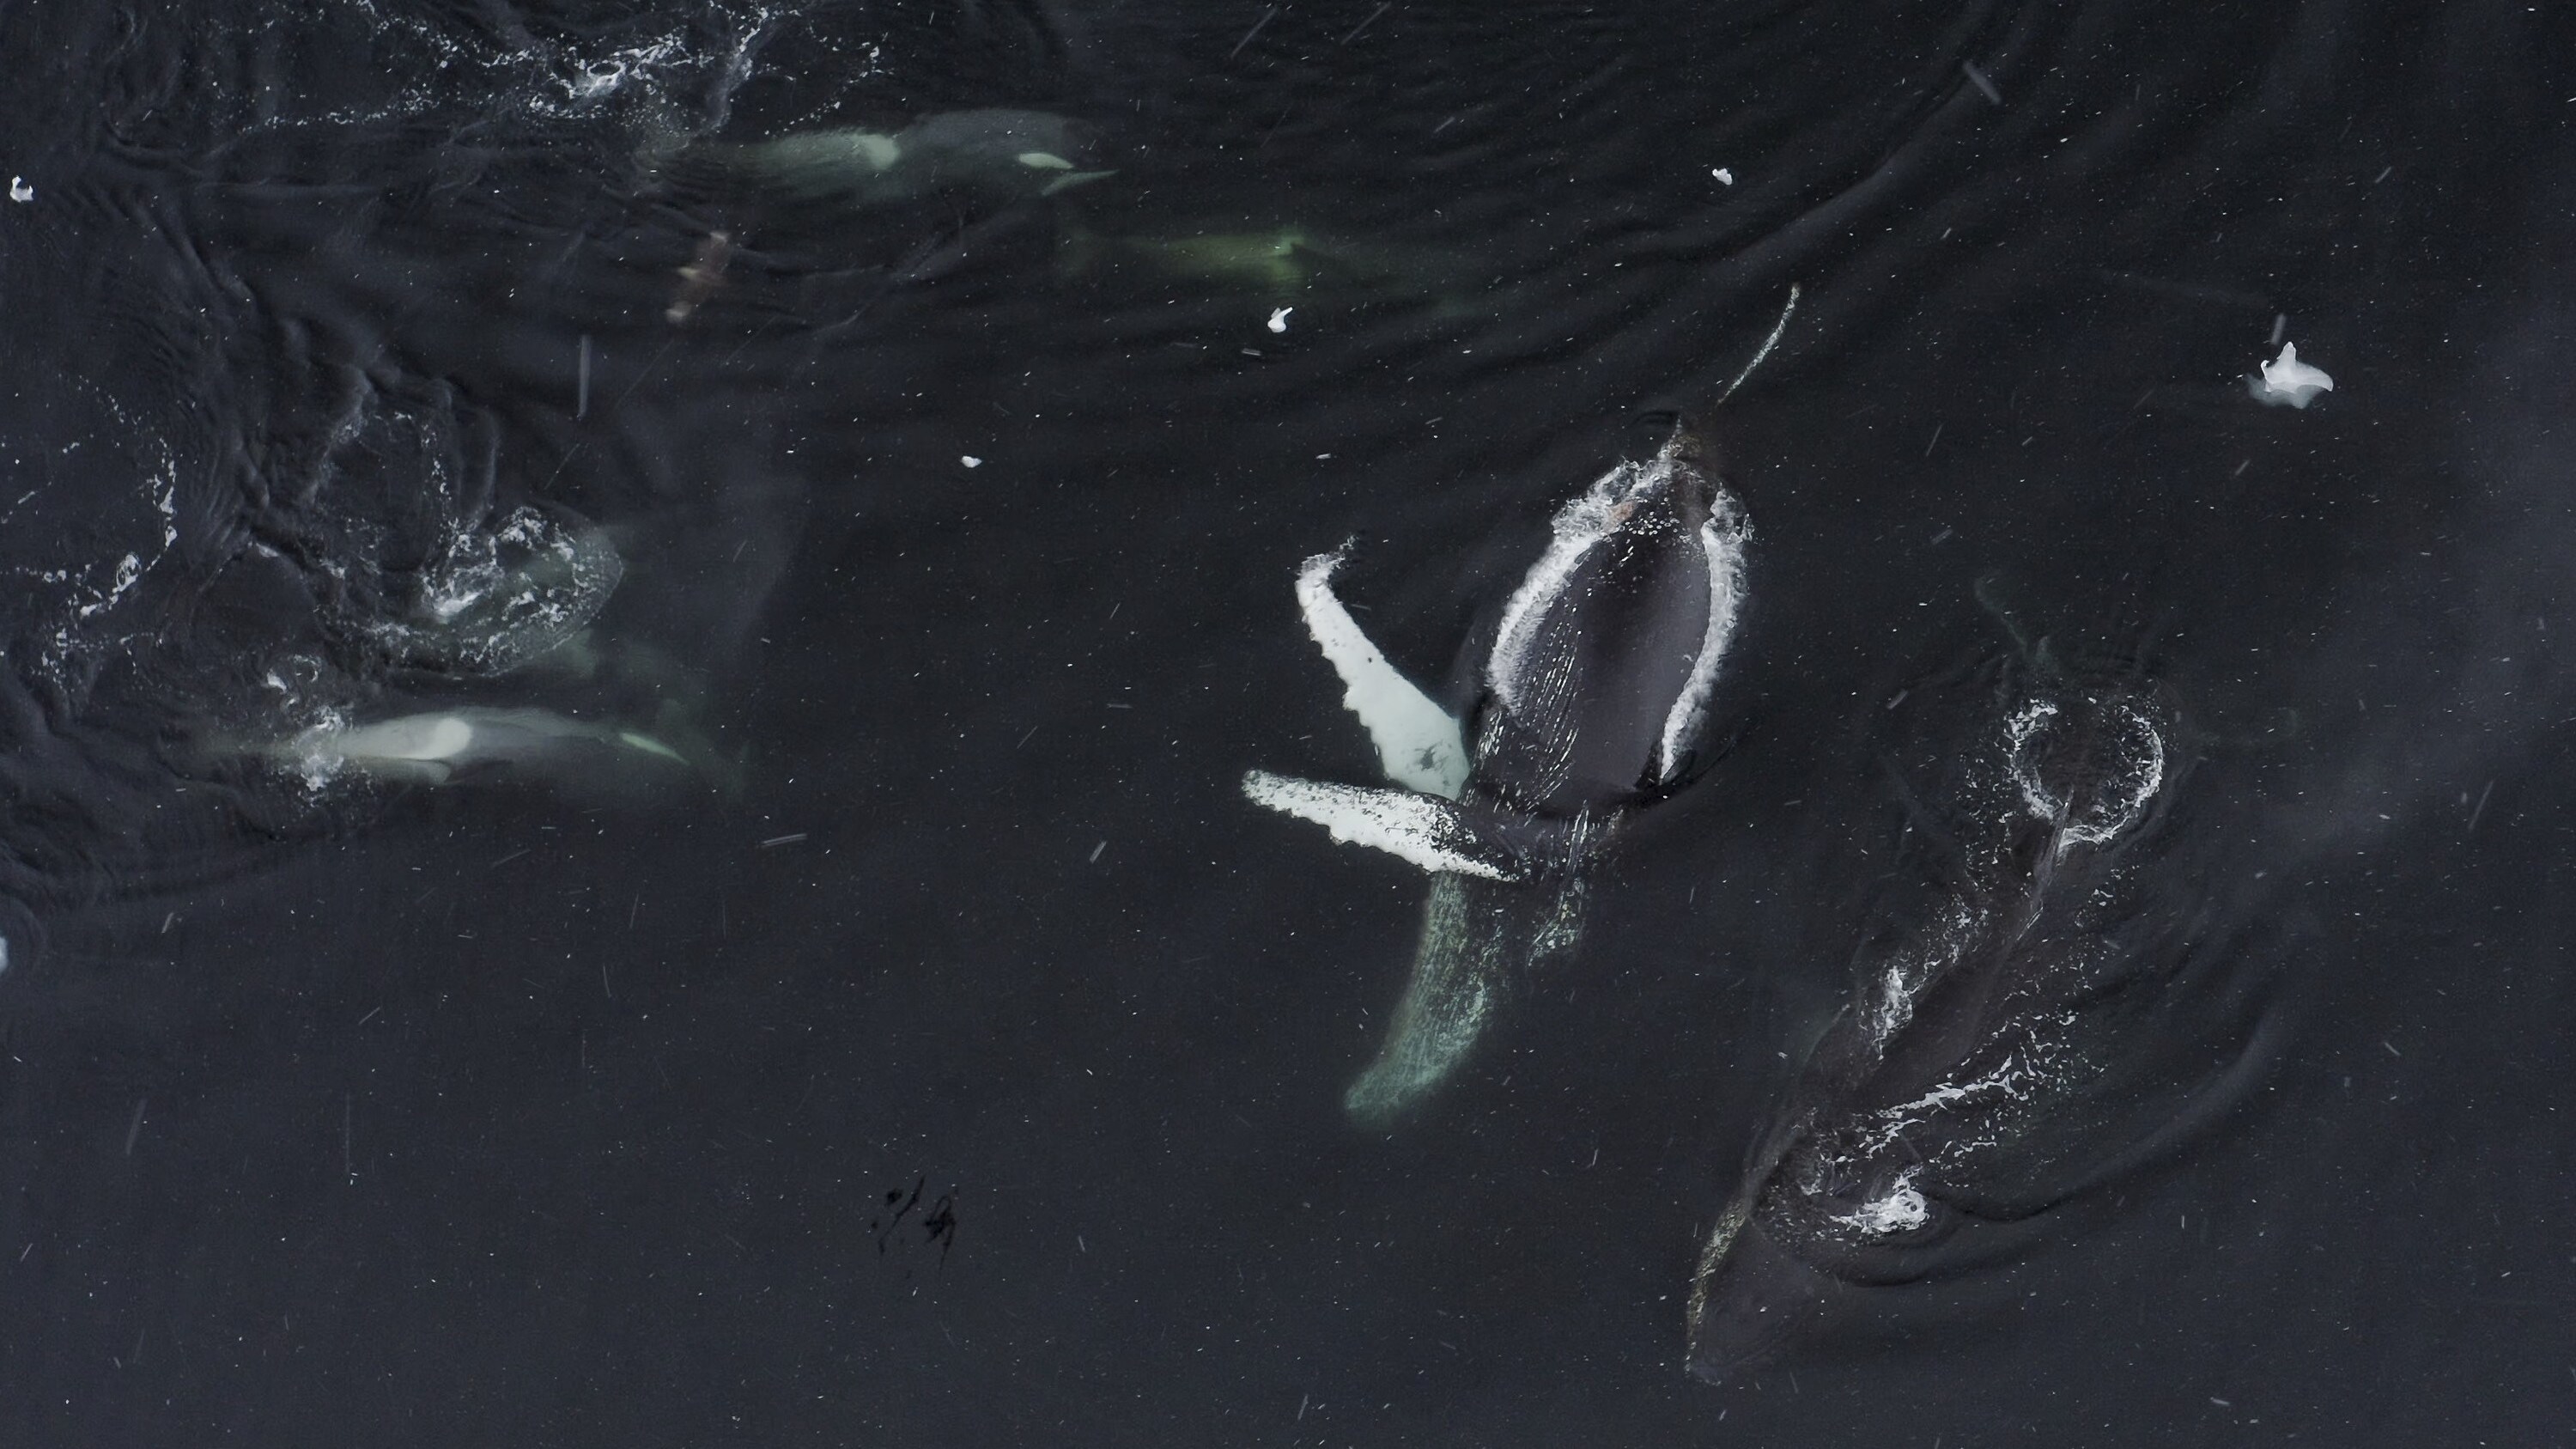 A humpback whale surrounded by a pod of killer whales. (credit: National Geographic for Disney+/Bertie Gregory)